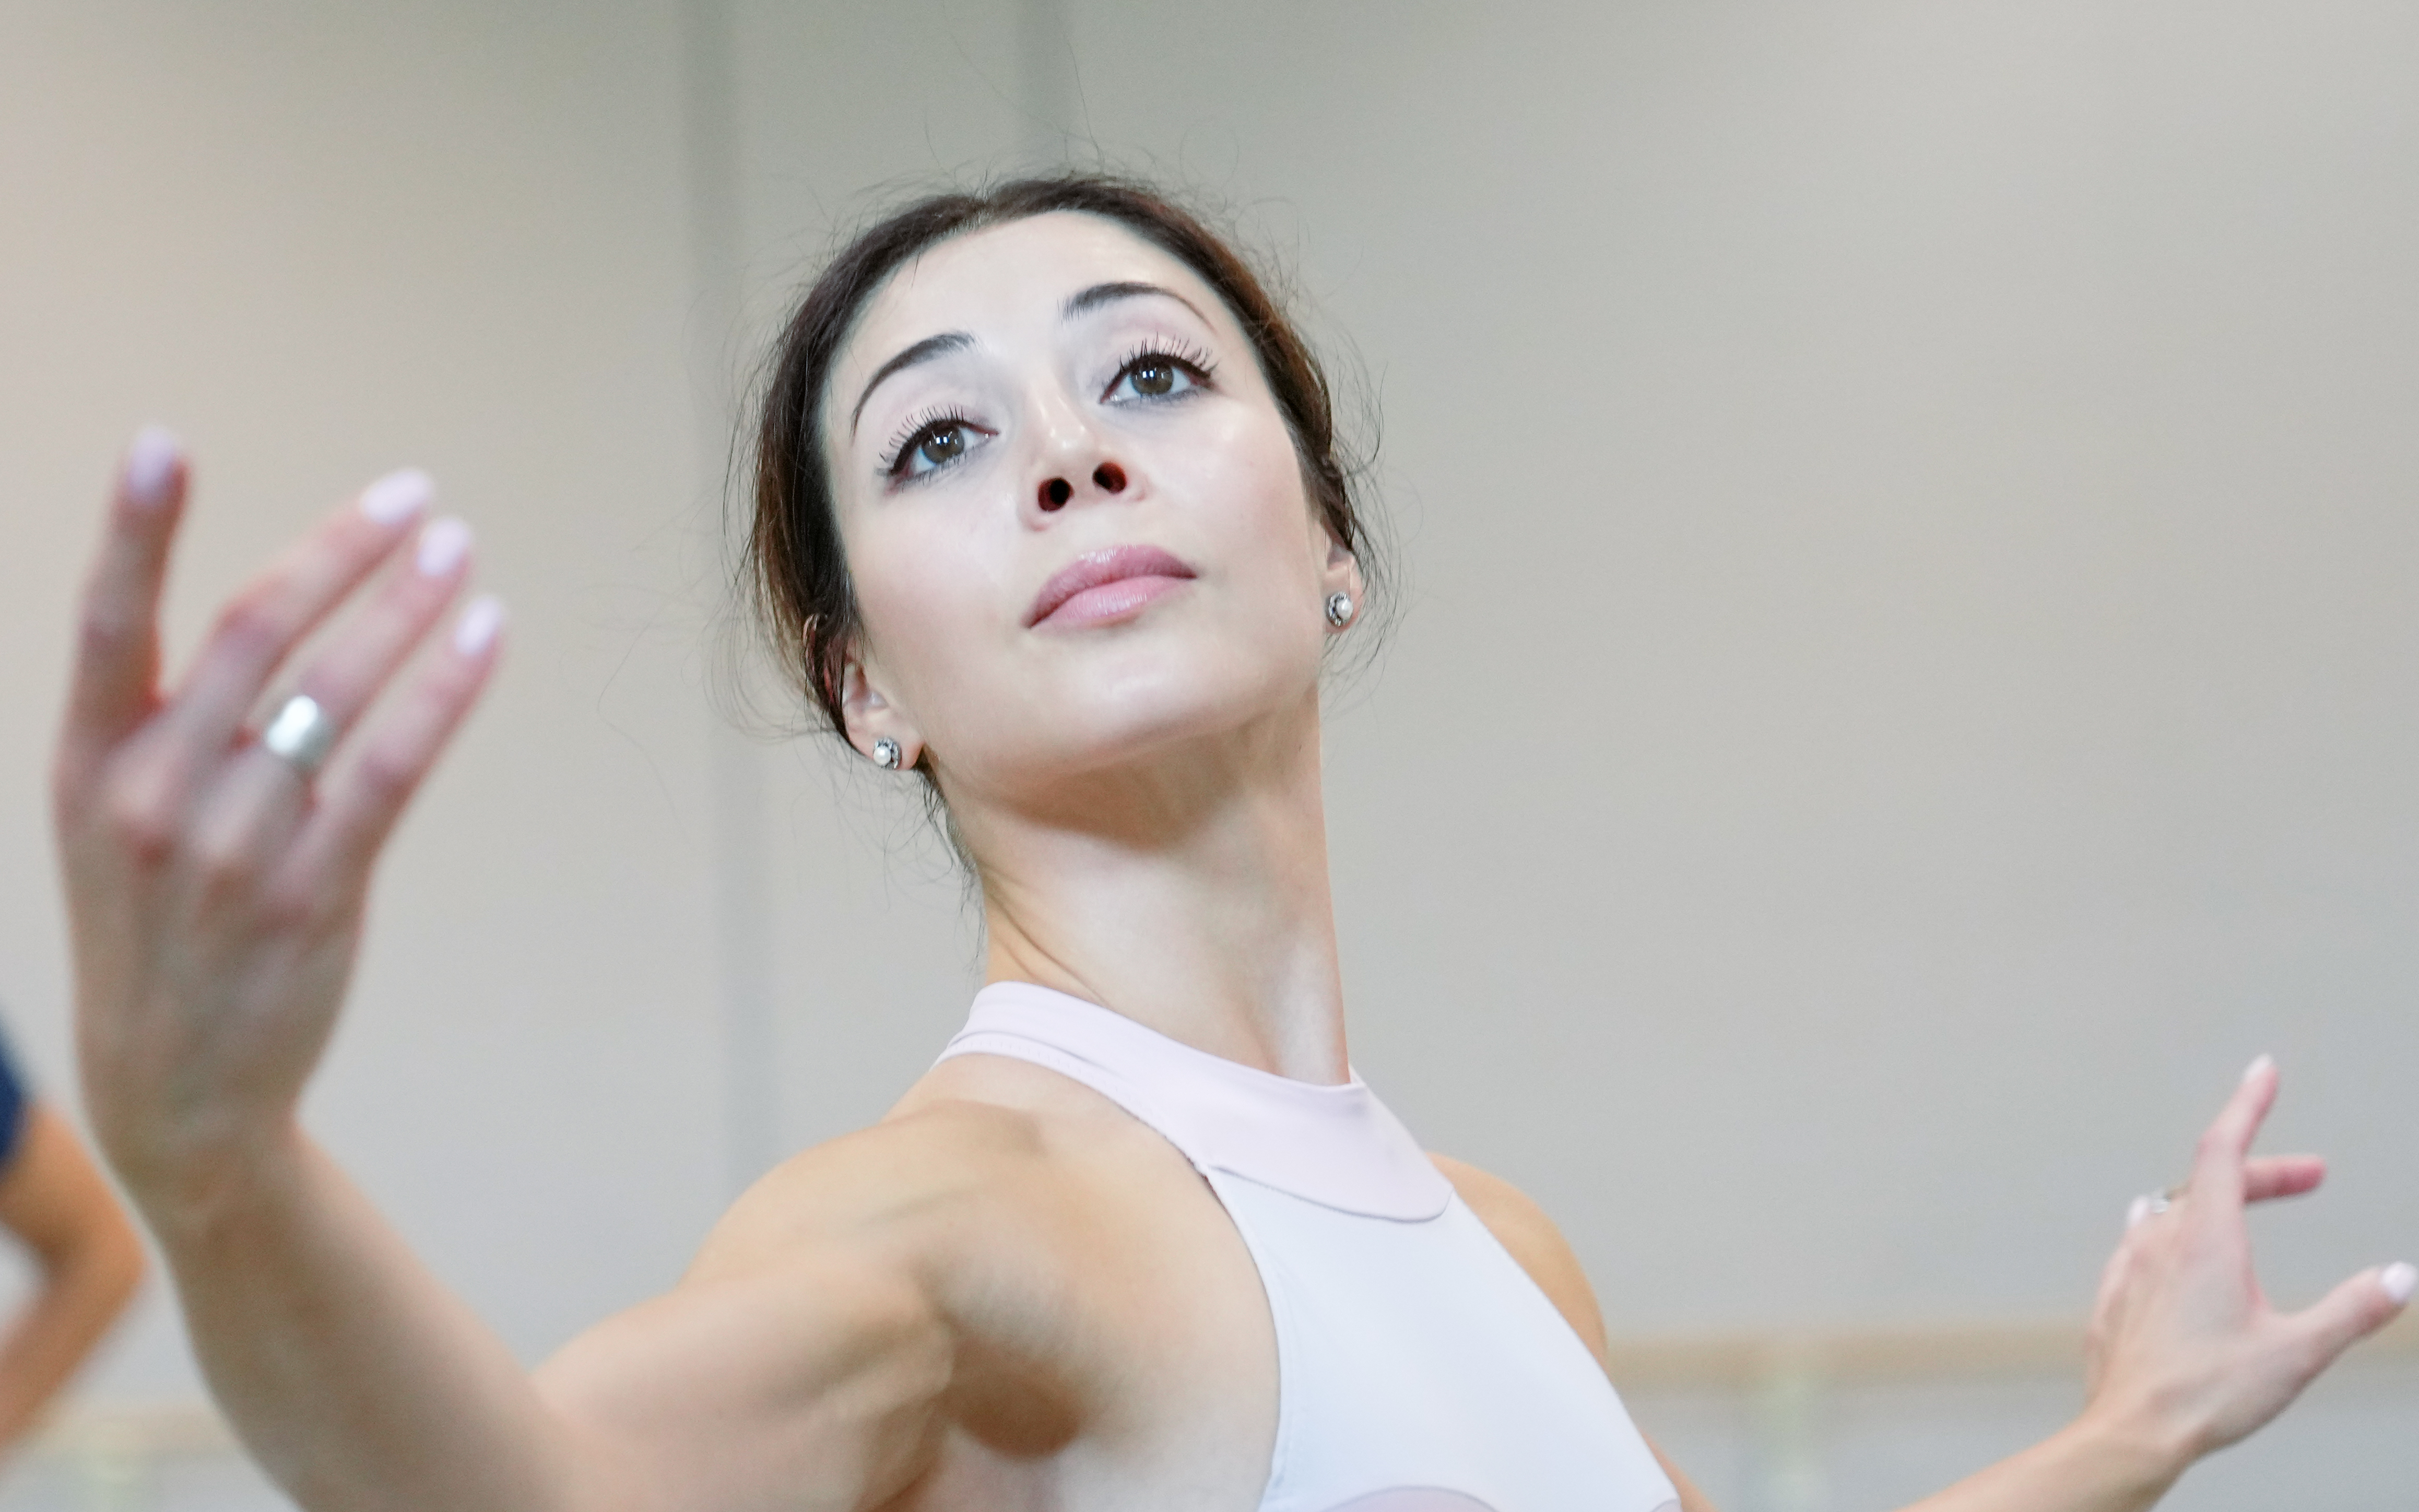 Maia during rehearsal of The Sleeping Beauty